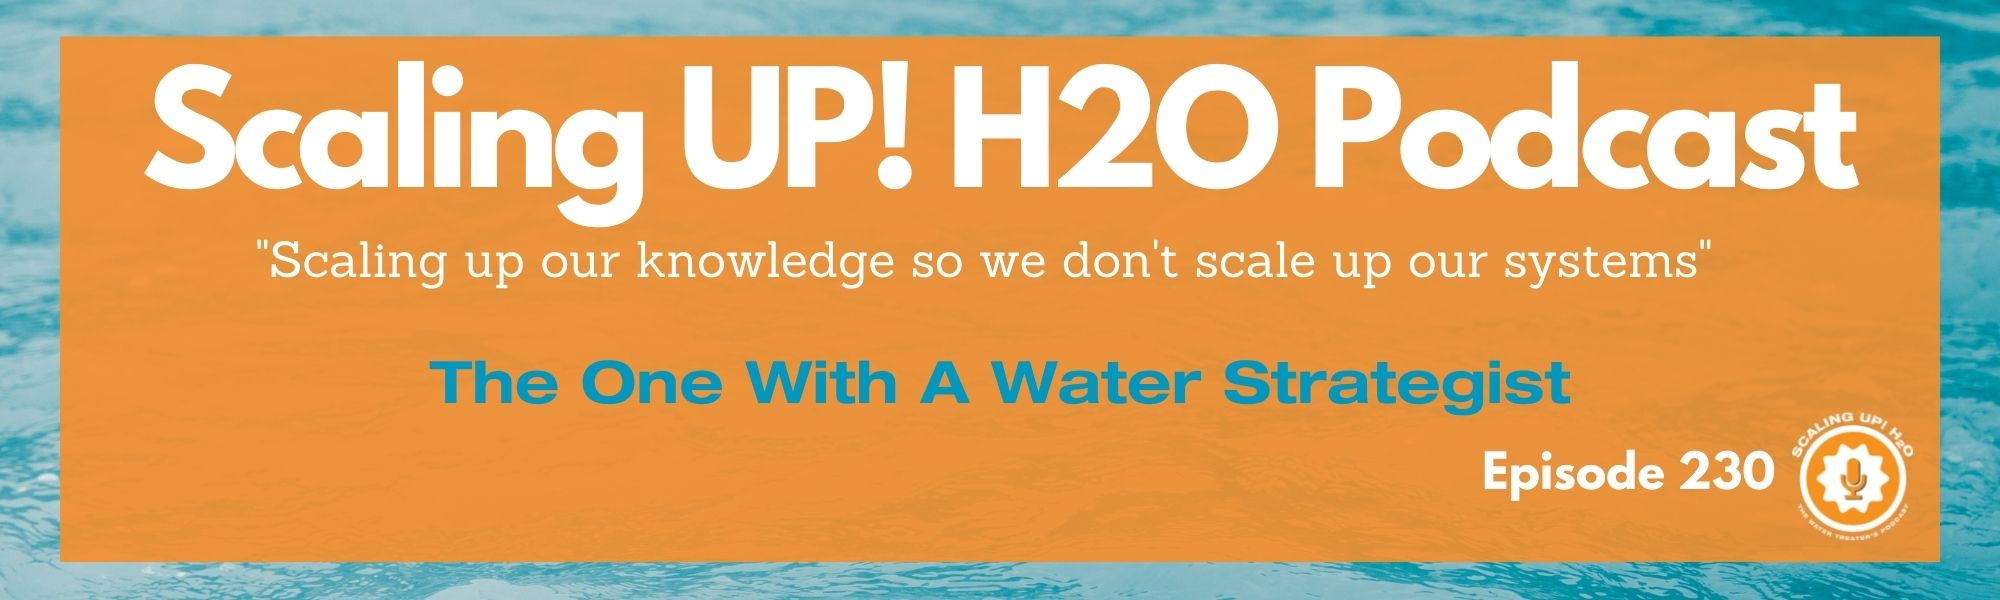 230 The One With A Water Strategist - Scaling UP! H2O